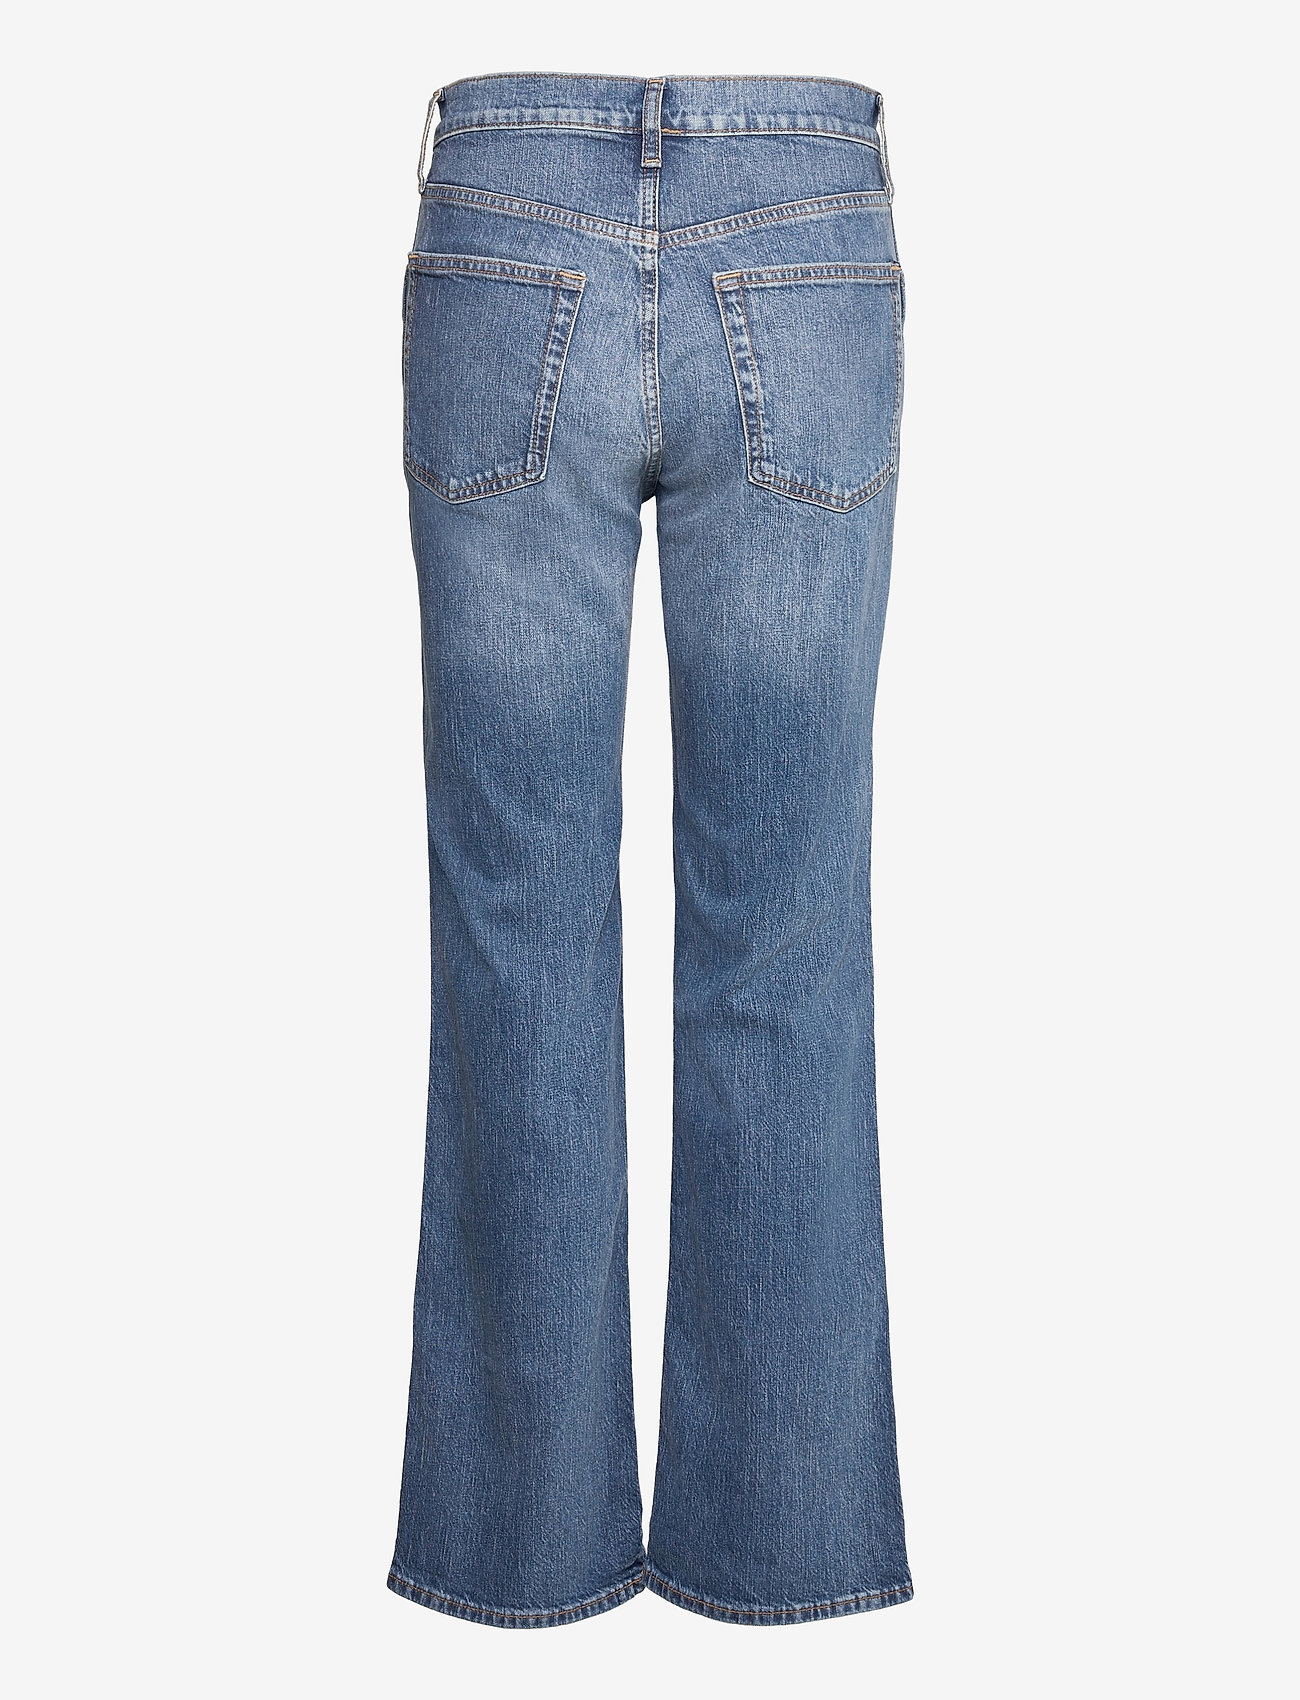 GAP High Rise Vintage Flare Jeans With Washwellâ¢ (Medium Indigo 8 